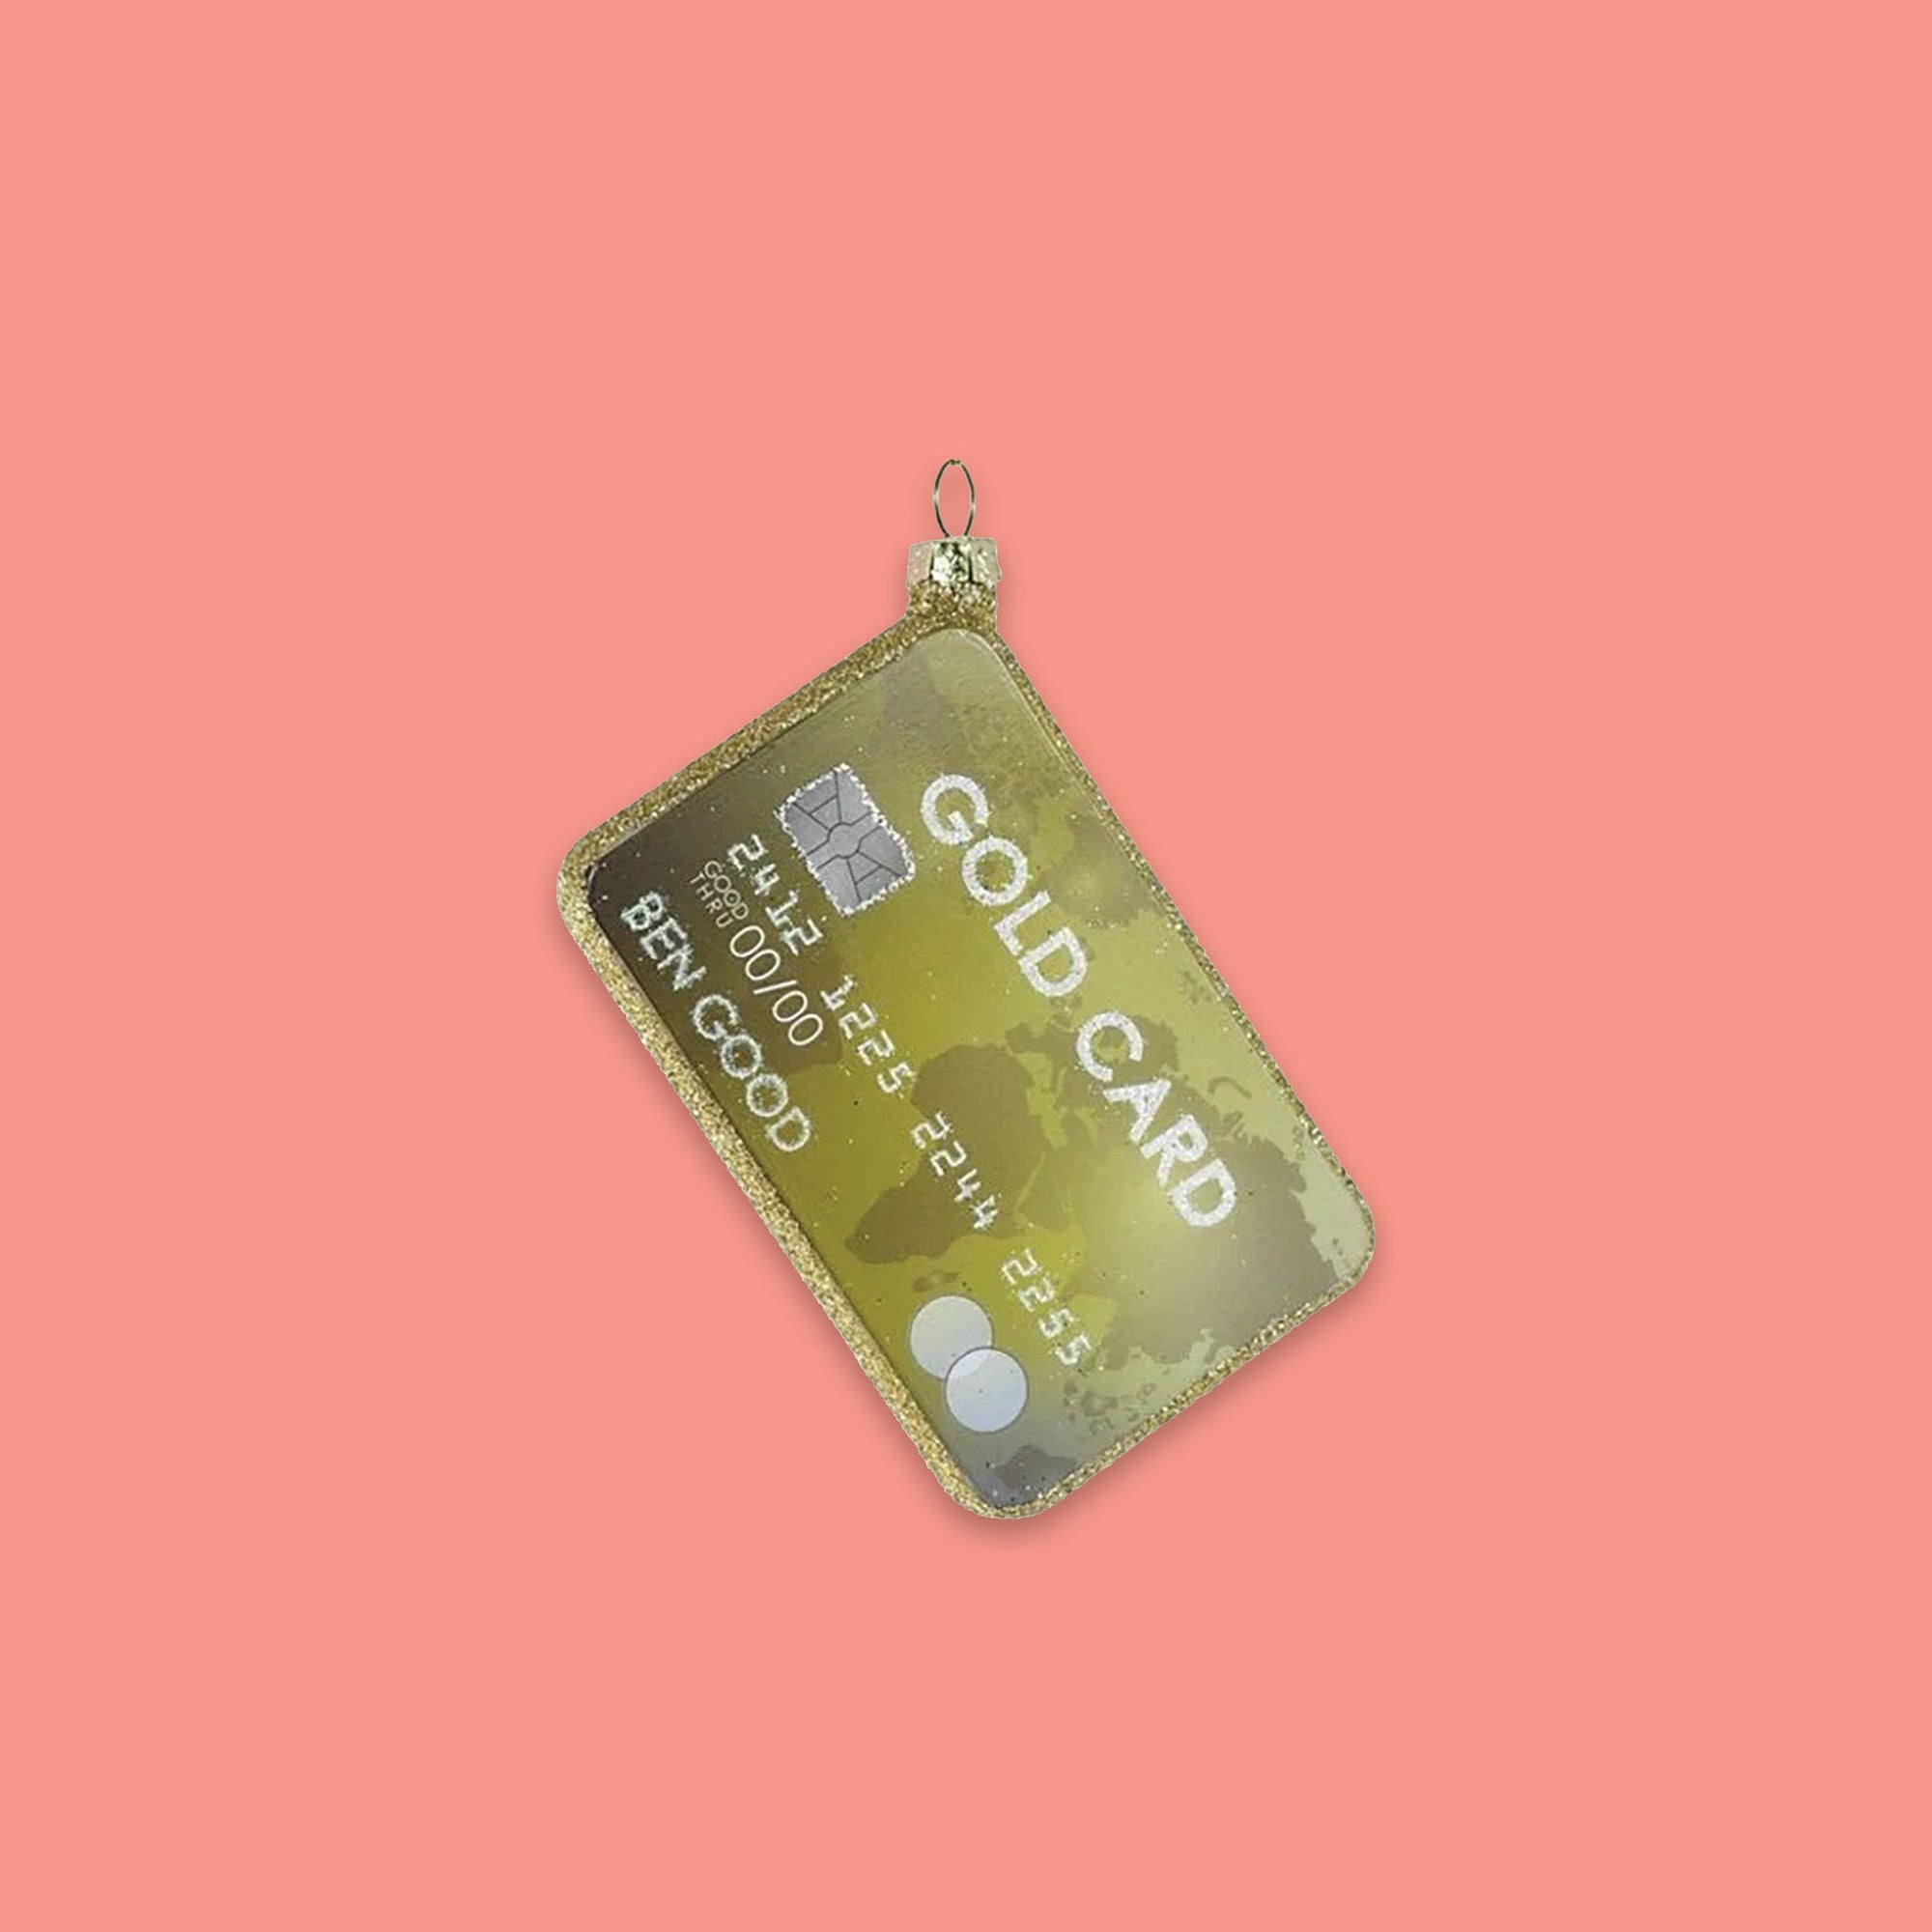 On a coral pink background sits an ornament. This is a glass ornament of a gold credit card. It says "GOLD CARD" and the name on it is "BEEN GOOD." It looks like a real credit card and has gold glitter around the edge.